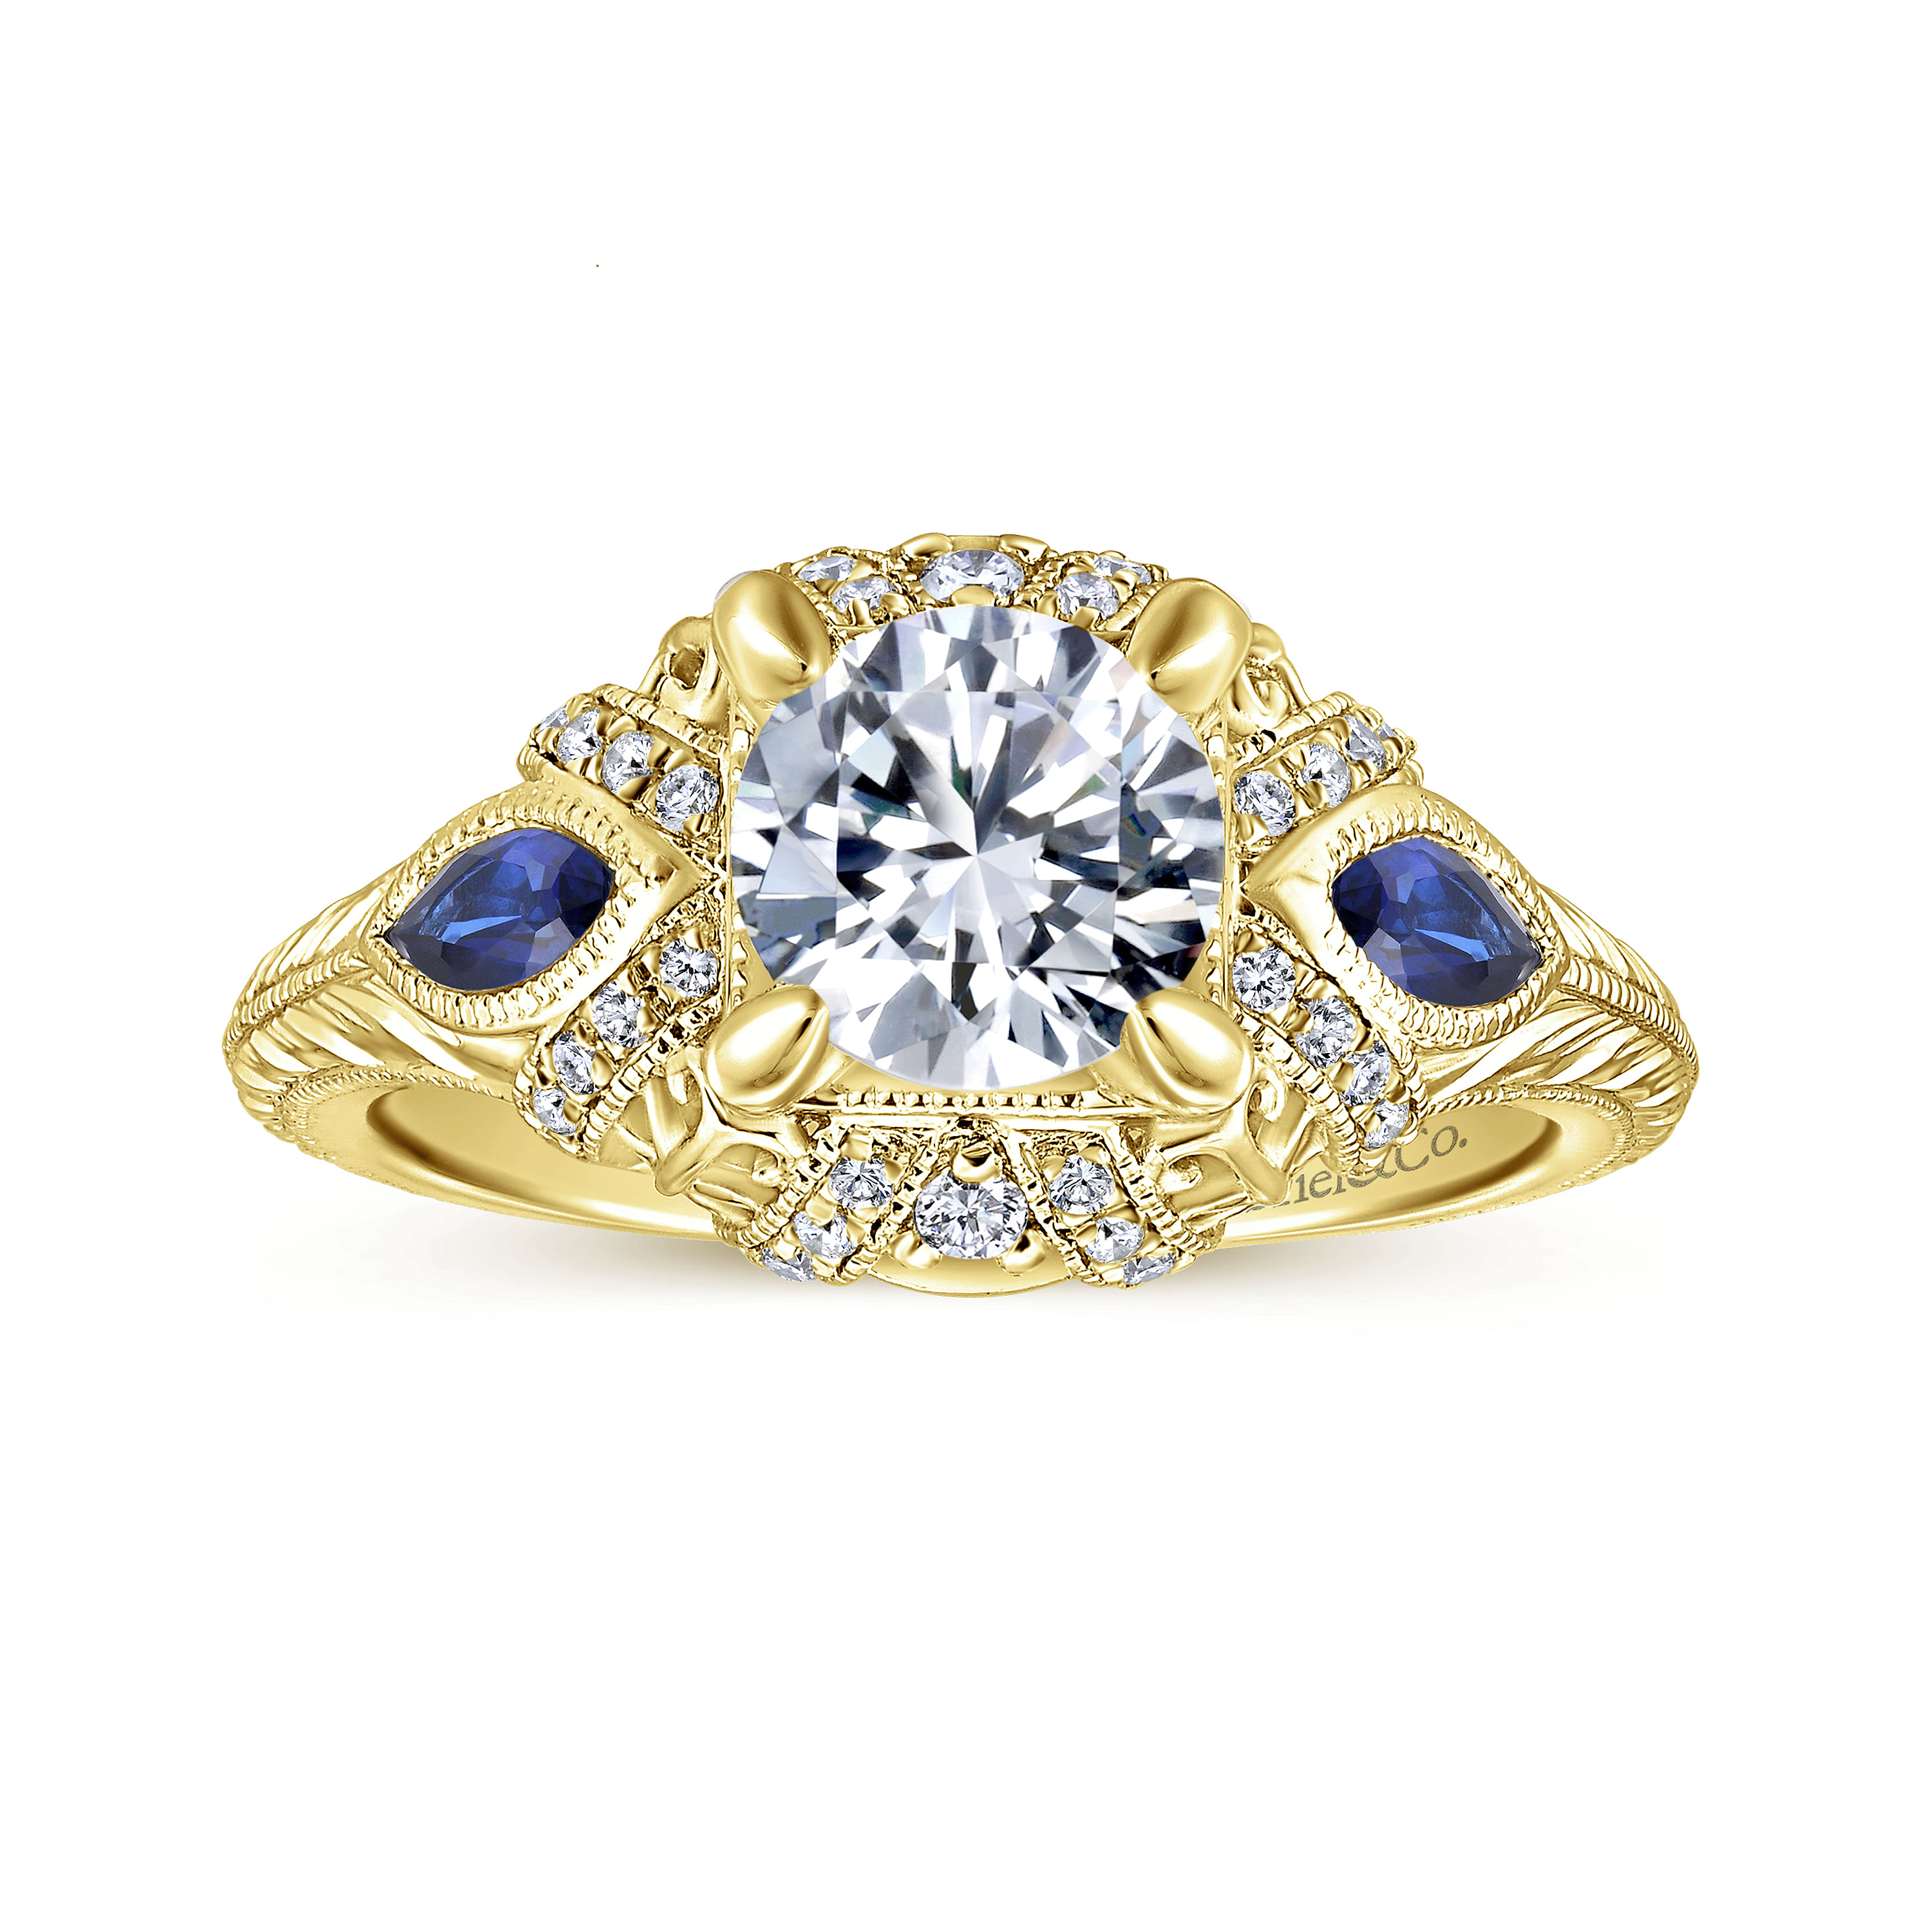 Vintage Inspired 14K Yellow Gold Round Three Stone Halo Diamond and Sapphire Engagement Ring